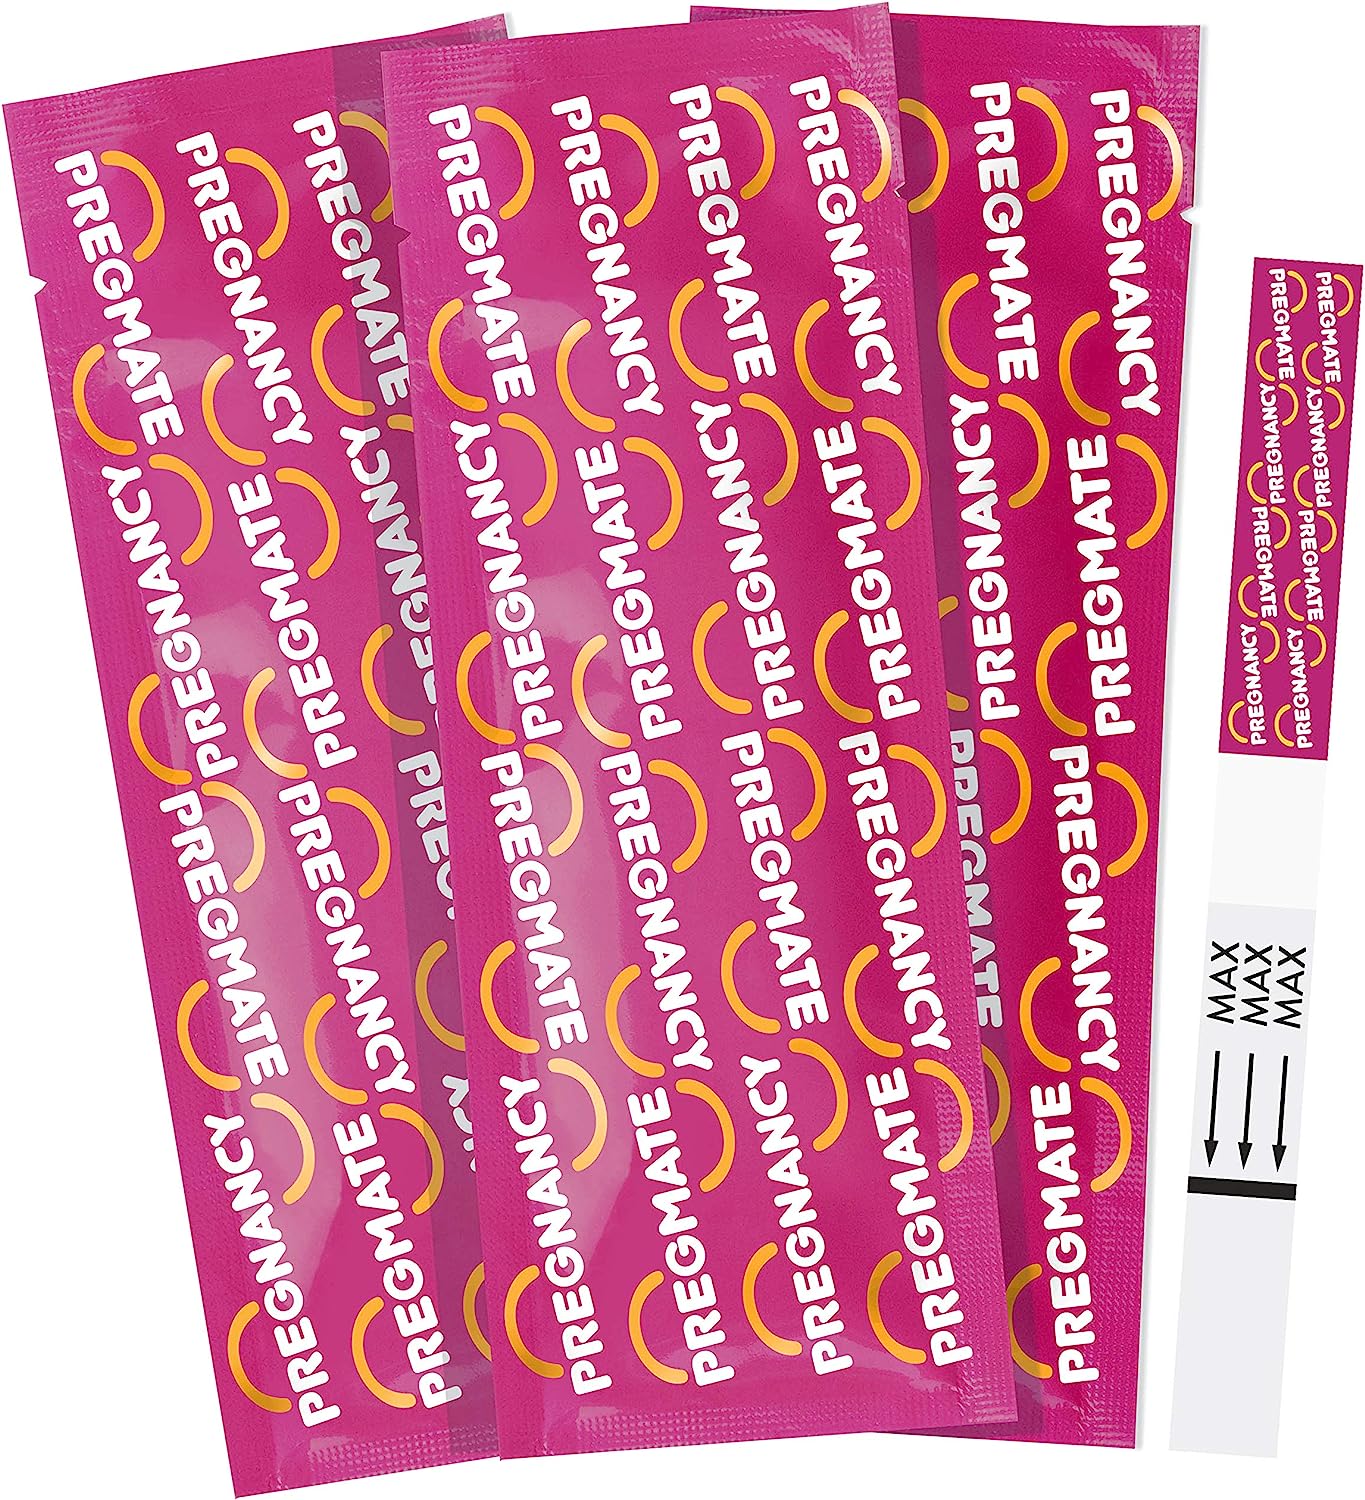 Pregmate 100 Ovulation and 50 Pregnancy Test Strips Predictor Kit